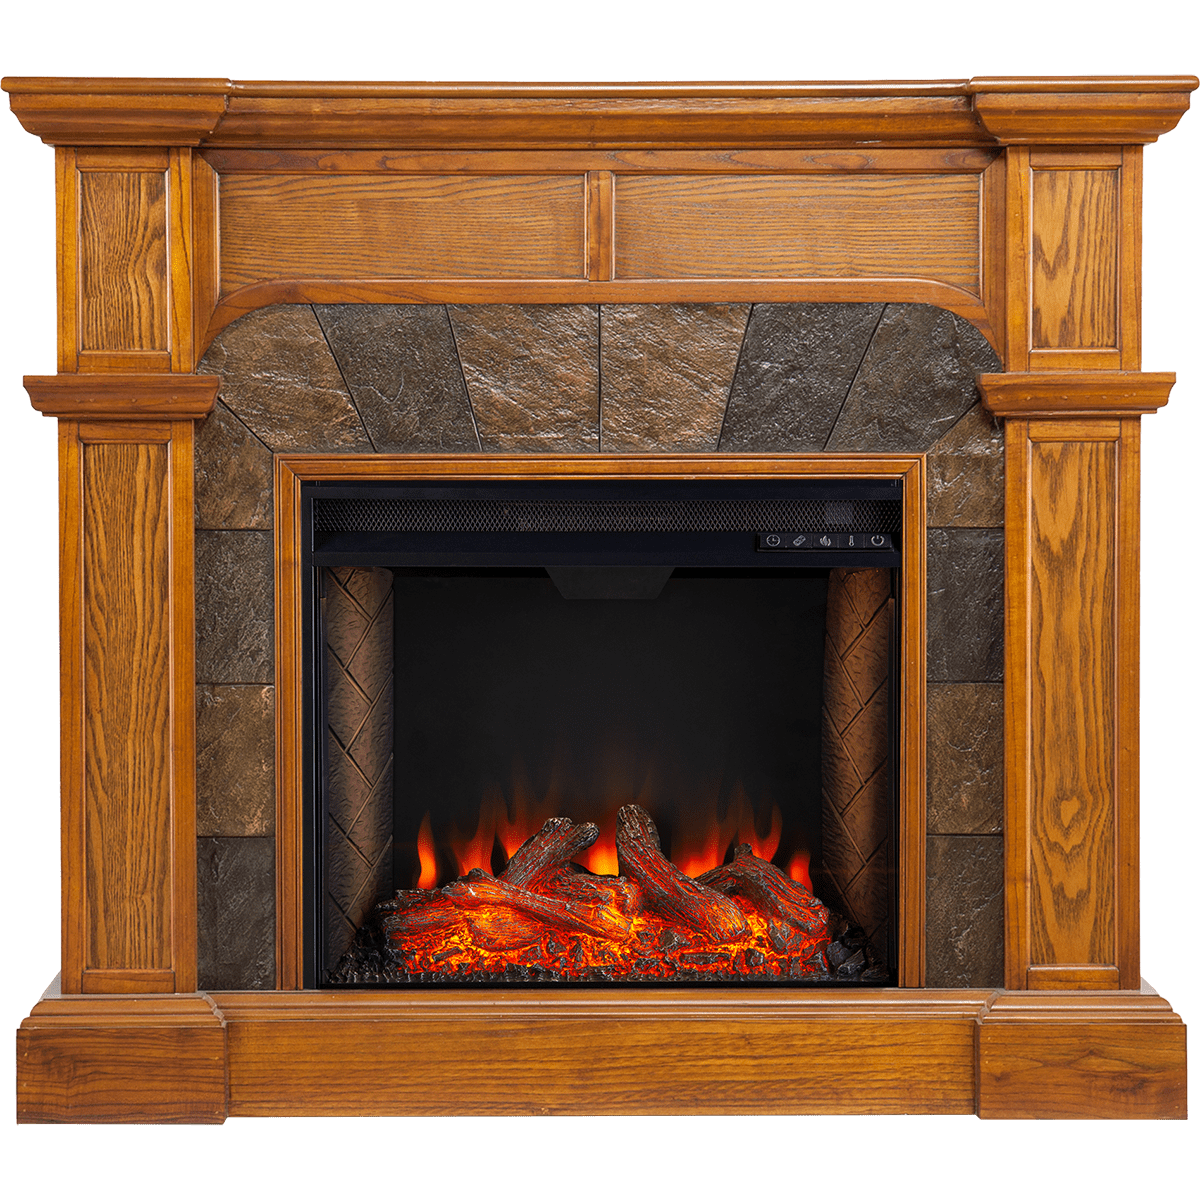 Cartwright Fireplace Tv Stand, Southern Enterprises Fireplace Replacement Parts